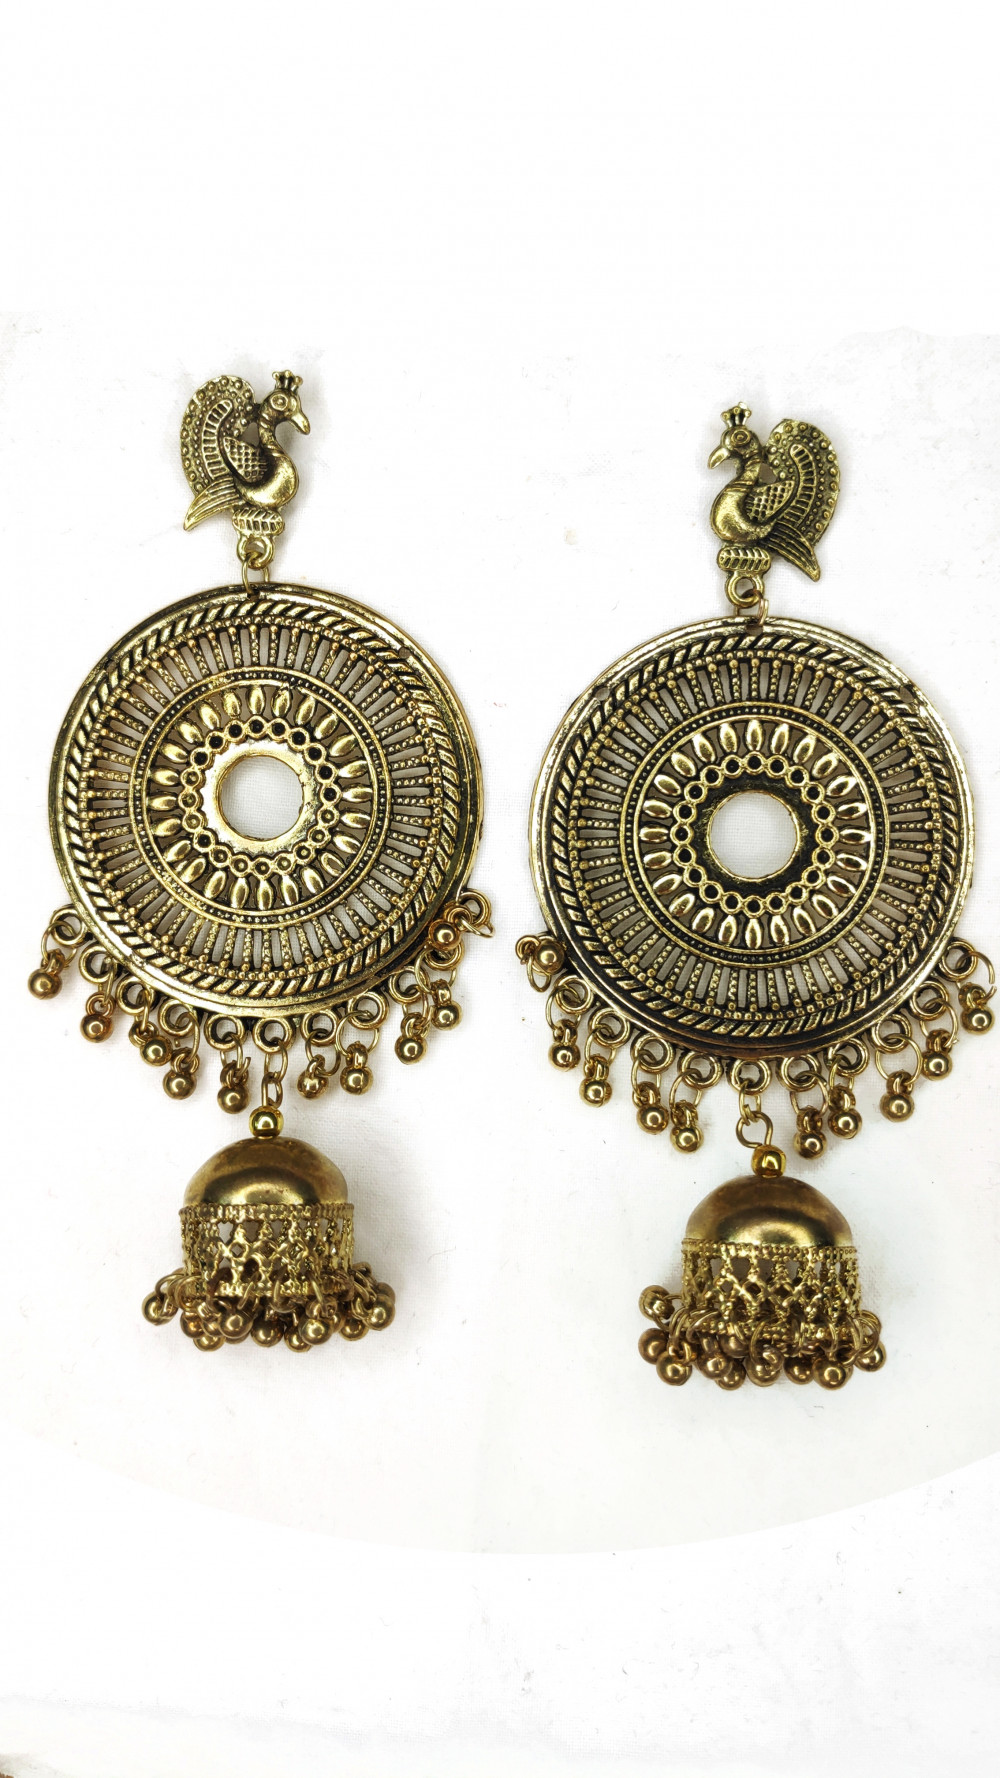 Enamel Work Earring with Gold Plated Oxidized Floral Design Alloy Stud   Digital Dress Room